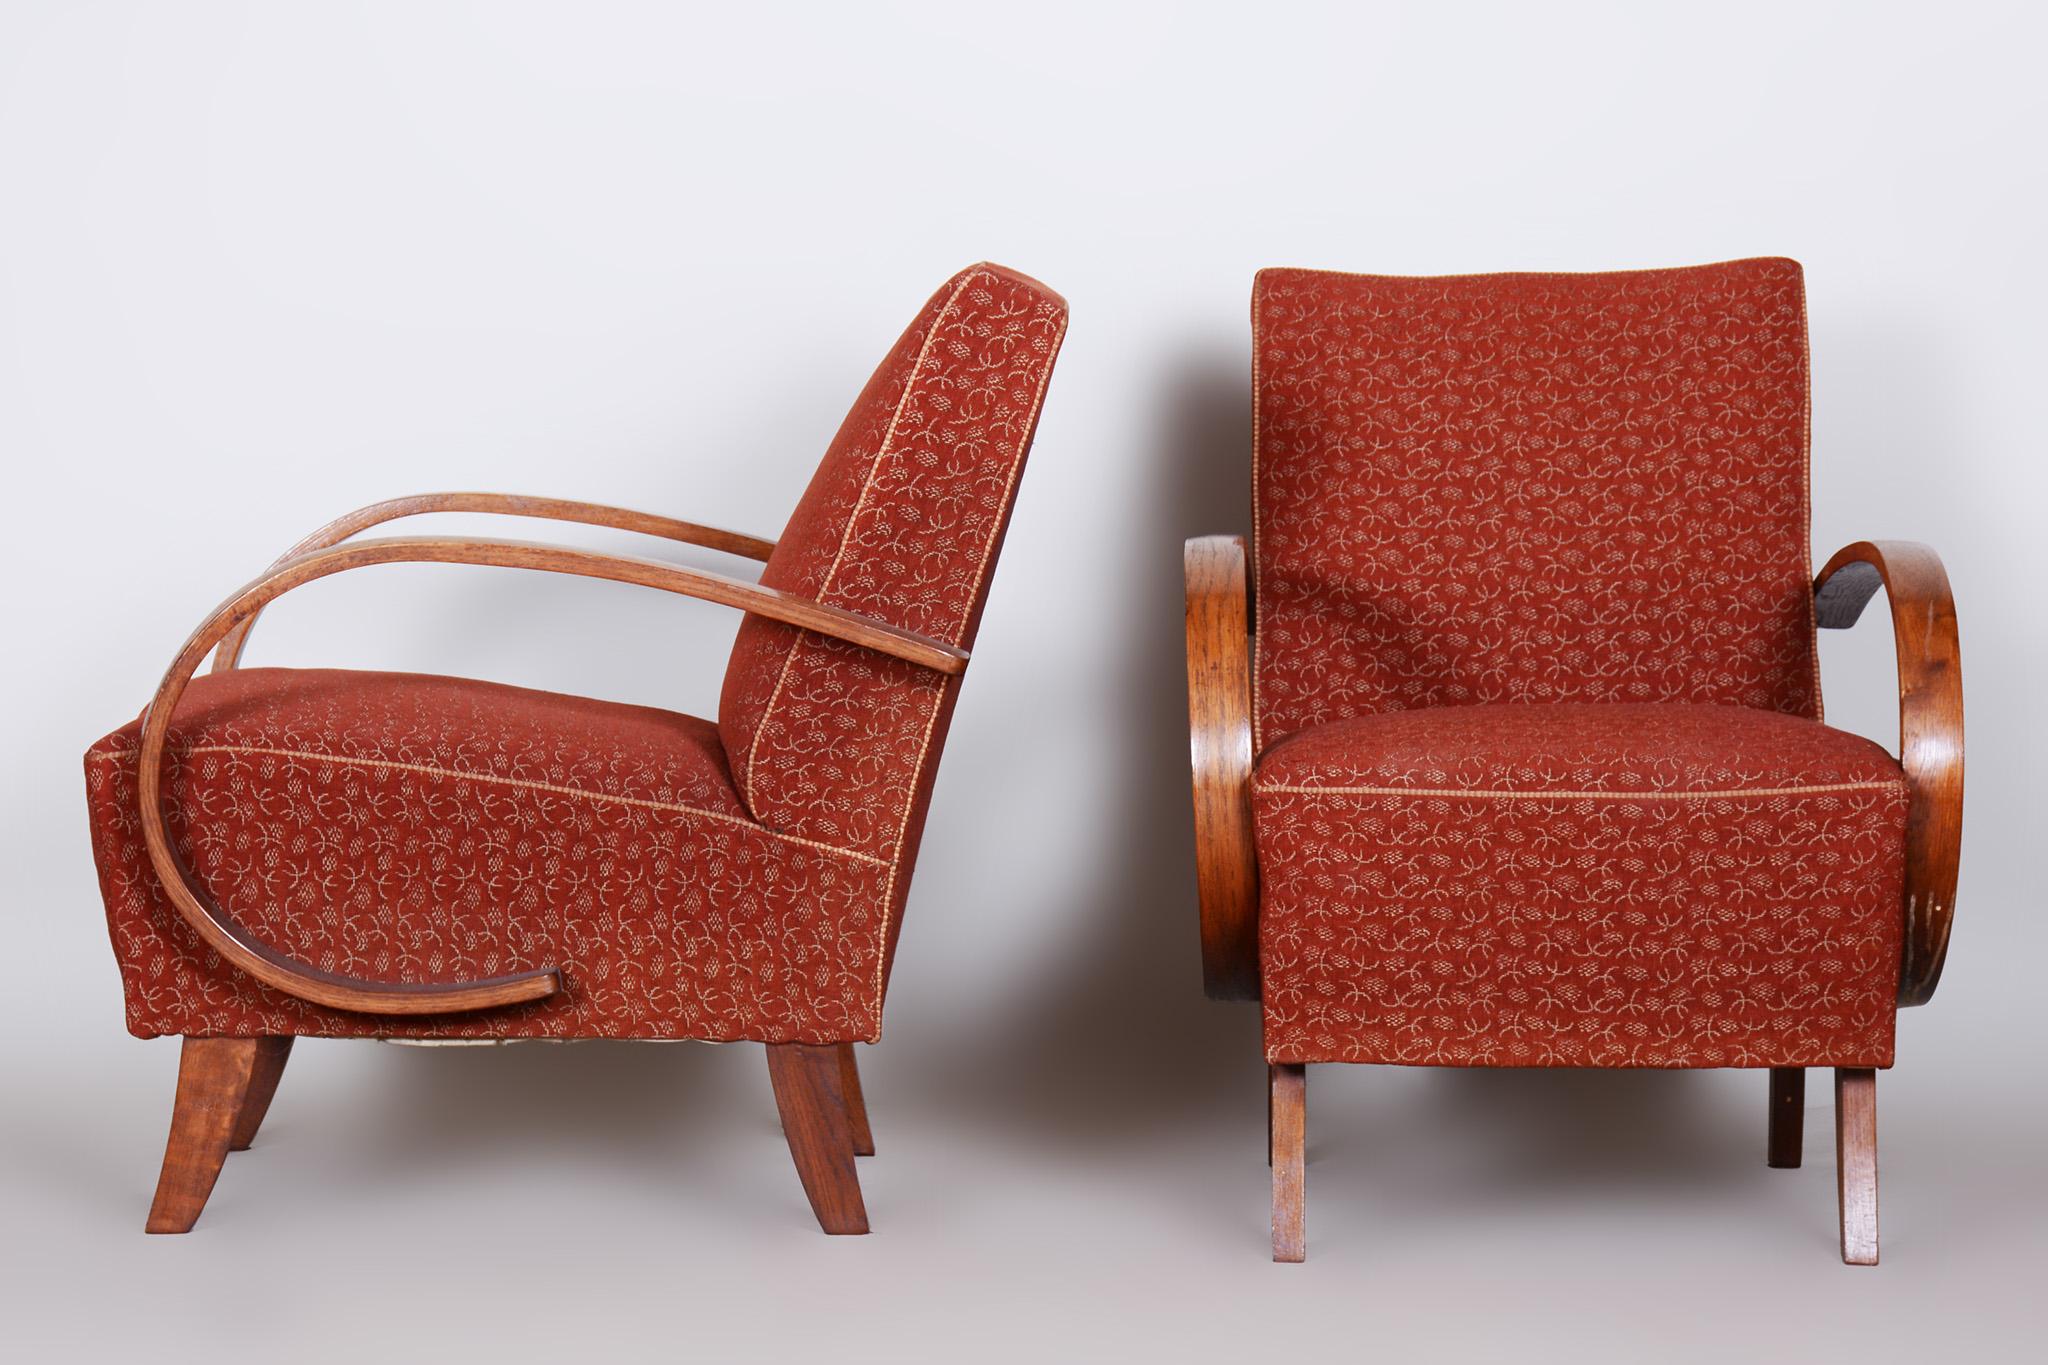 Pair of red Czech ArtDeco beech armchairs

Source: Czechia 
Period: 1930-1939
Architect: Jindrich Halabala 
Maker: UP Zavody 
Material: Beech, Fabric

Original preserved upholstery. The fabric has been professionally cleaned.

Designed by